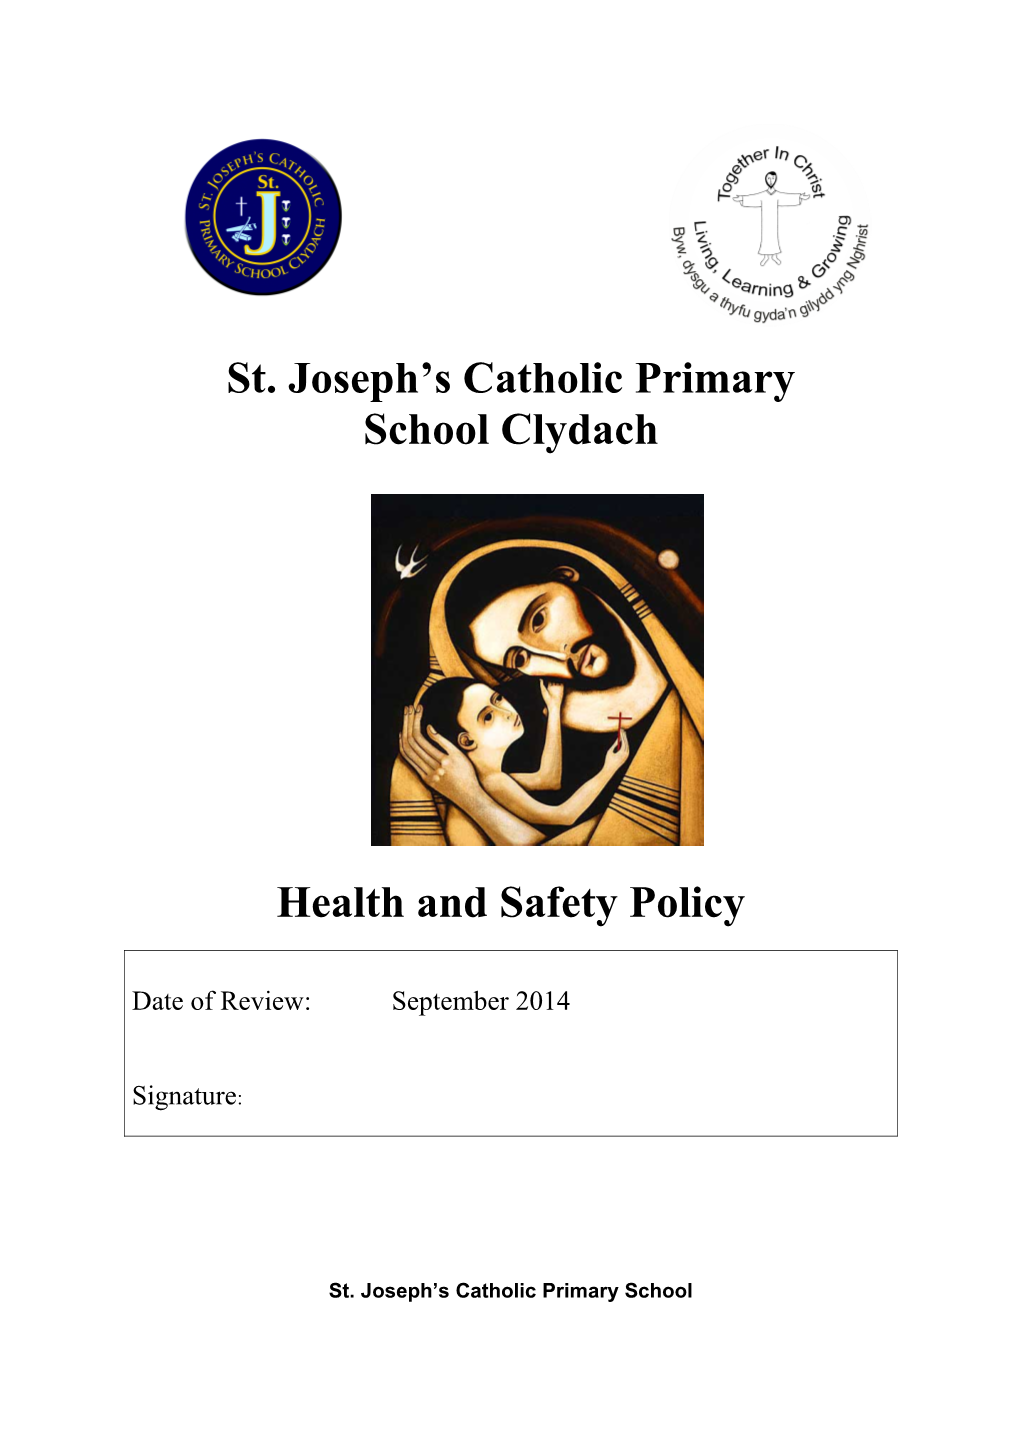 Healith & Safety Policy